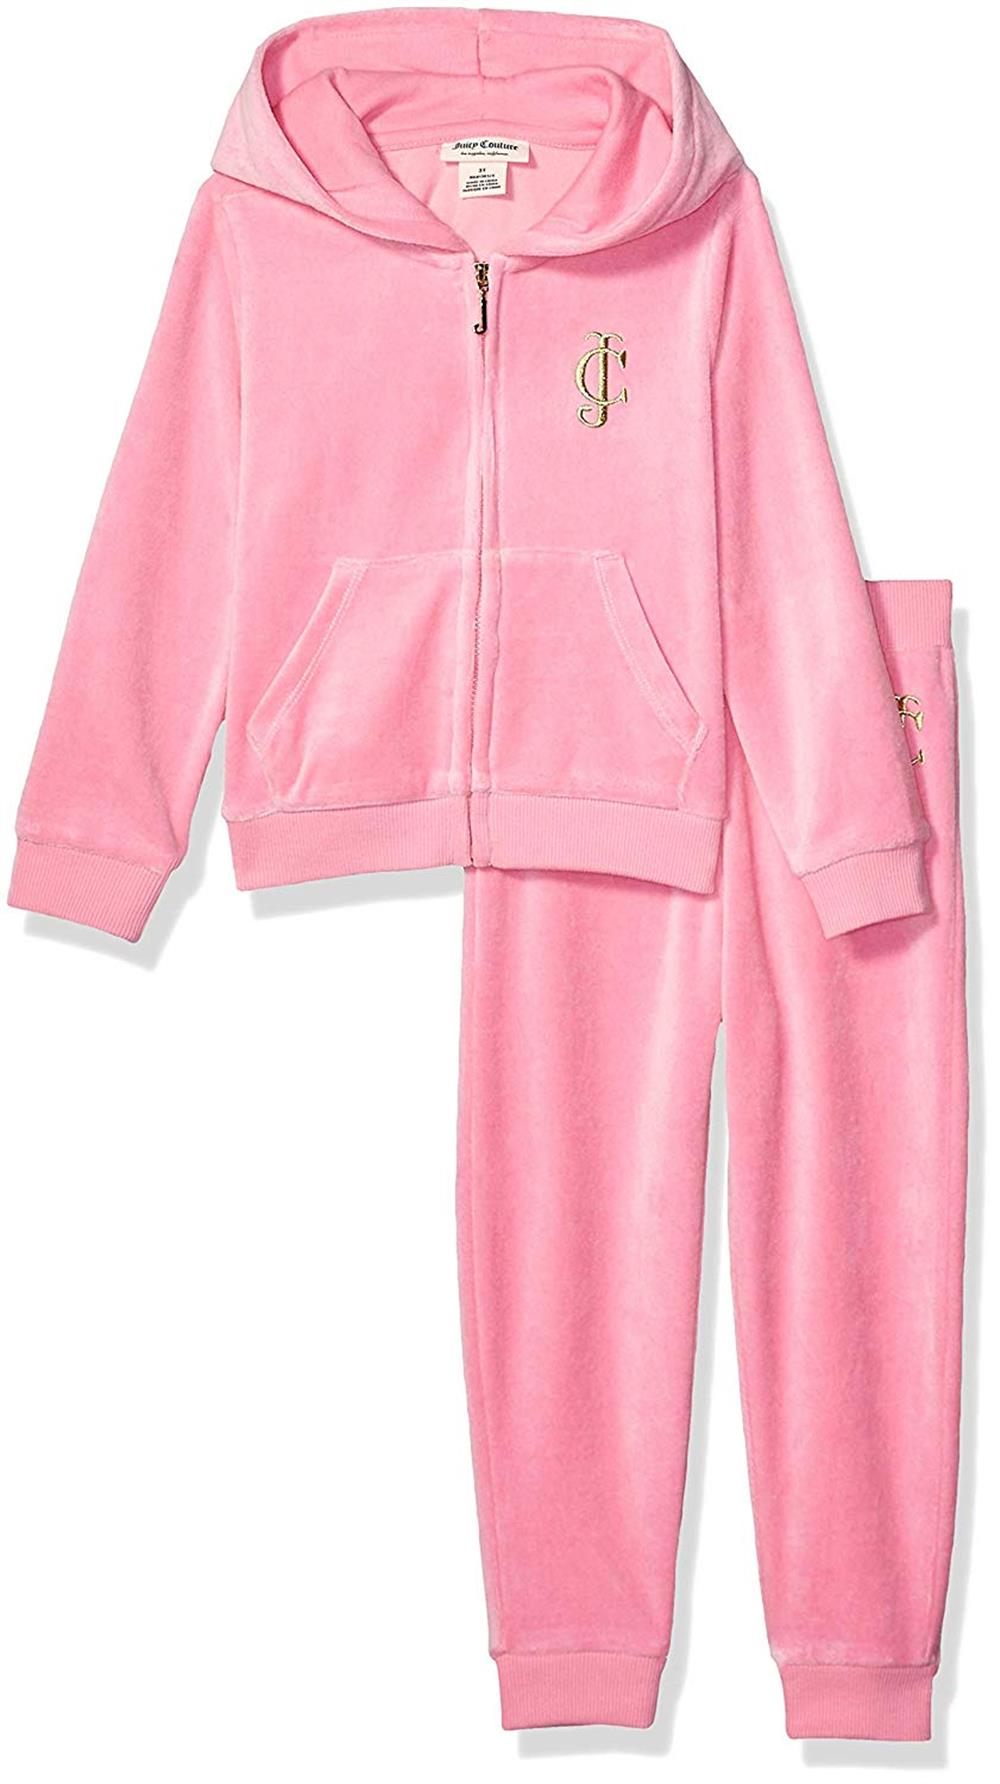 Juicy Couture Girls' 2 Pieces Hooded Velour Jog Set